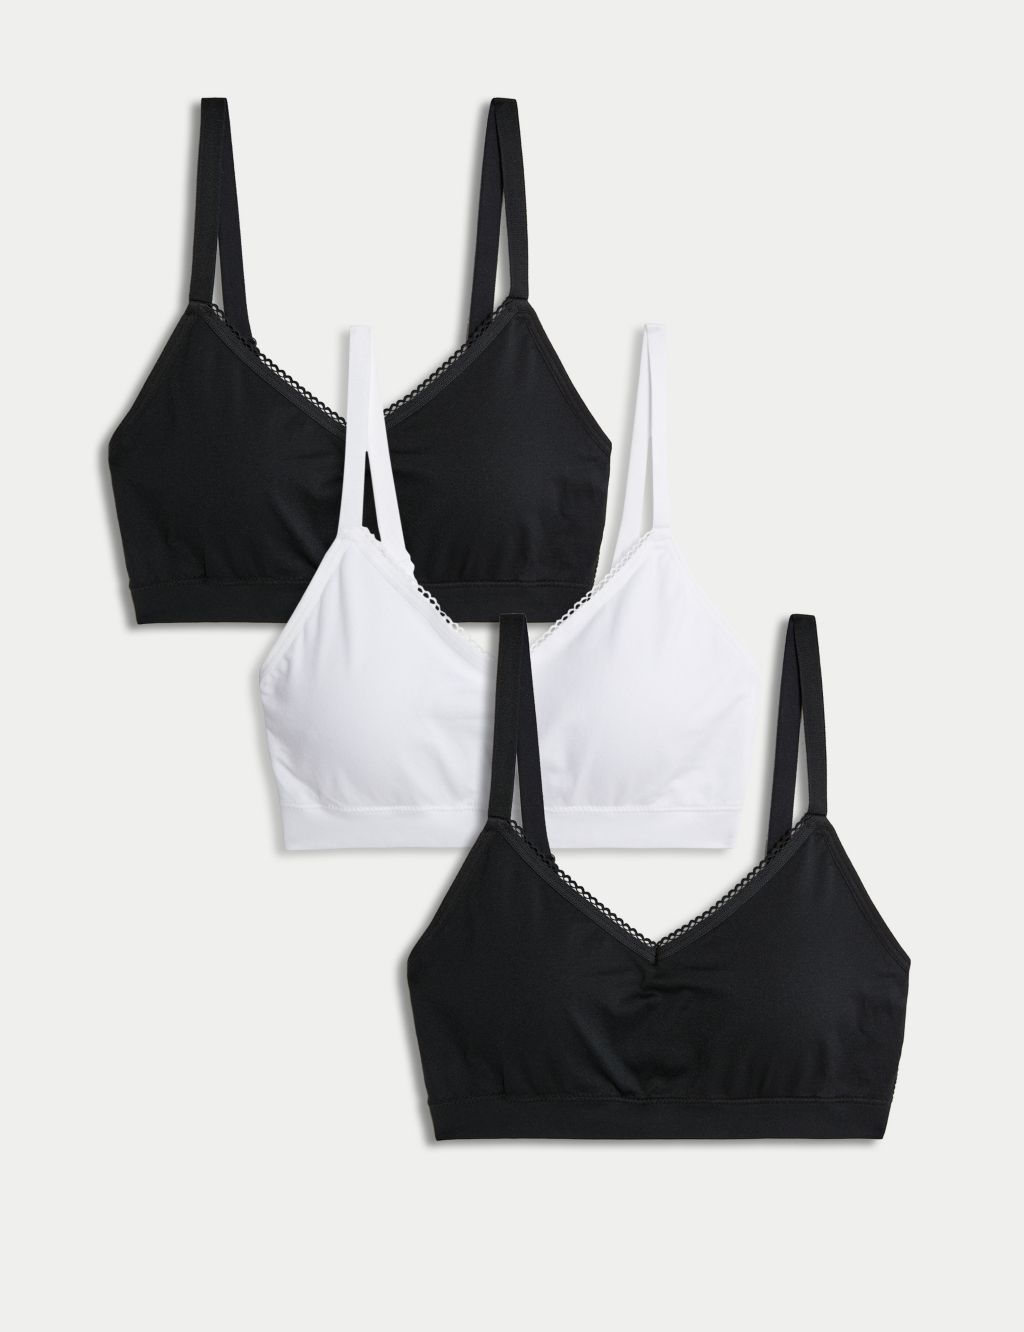 https://asset1.cxnmarksandspencer.com/is/image/mands/3pk-Seamless-Non-Wired-Bralettes/SD_02_T33_7029_Y4_X_EC_0?$PDP_IMAGEGRID$&wid=1024&qlt=80